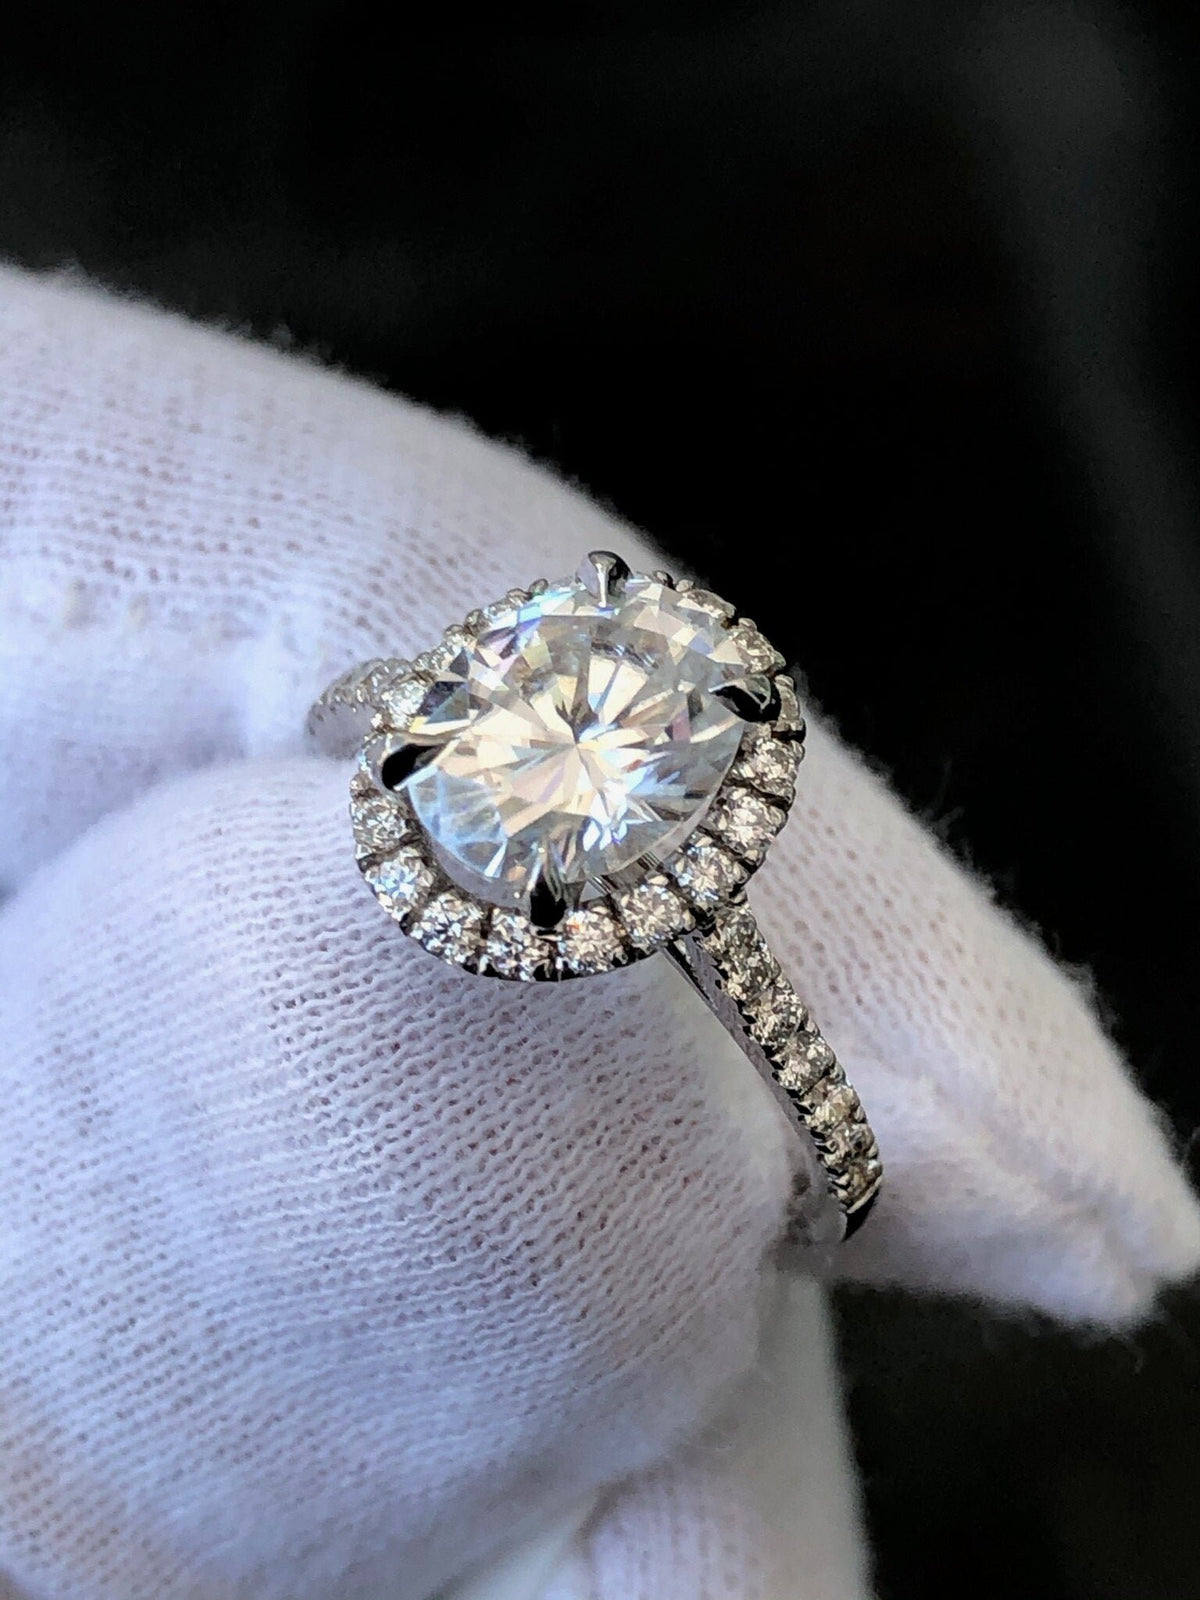 LIV 14K White Gold & Diamonds Pave Halo With a 2ct Oval Moissanite E/VVS Engagement Ring Size 6